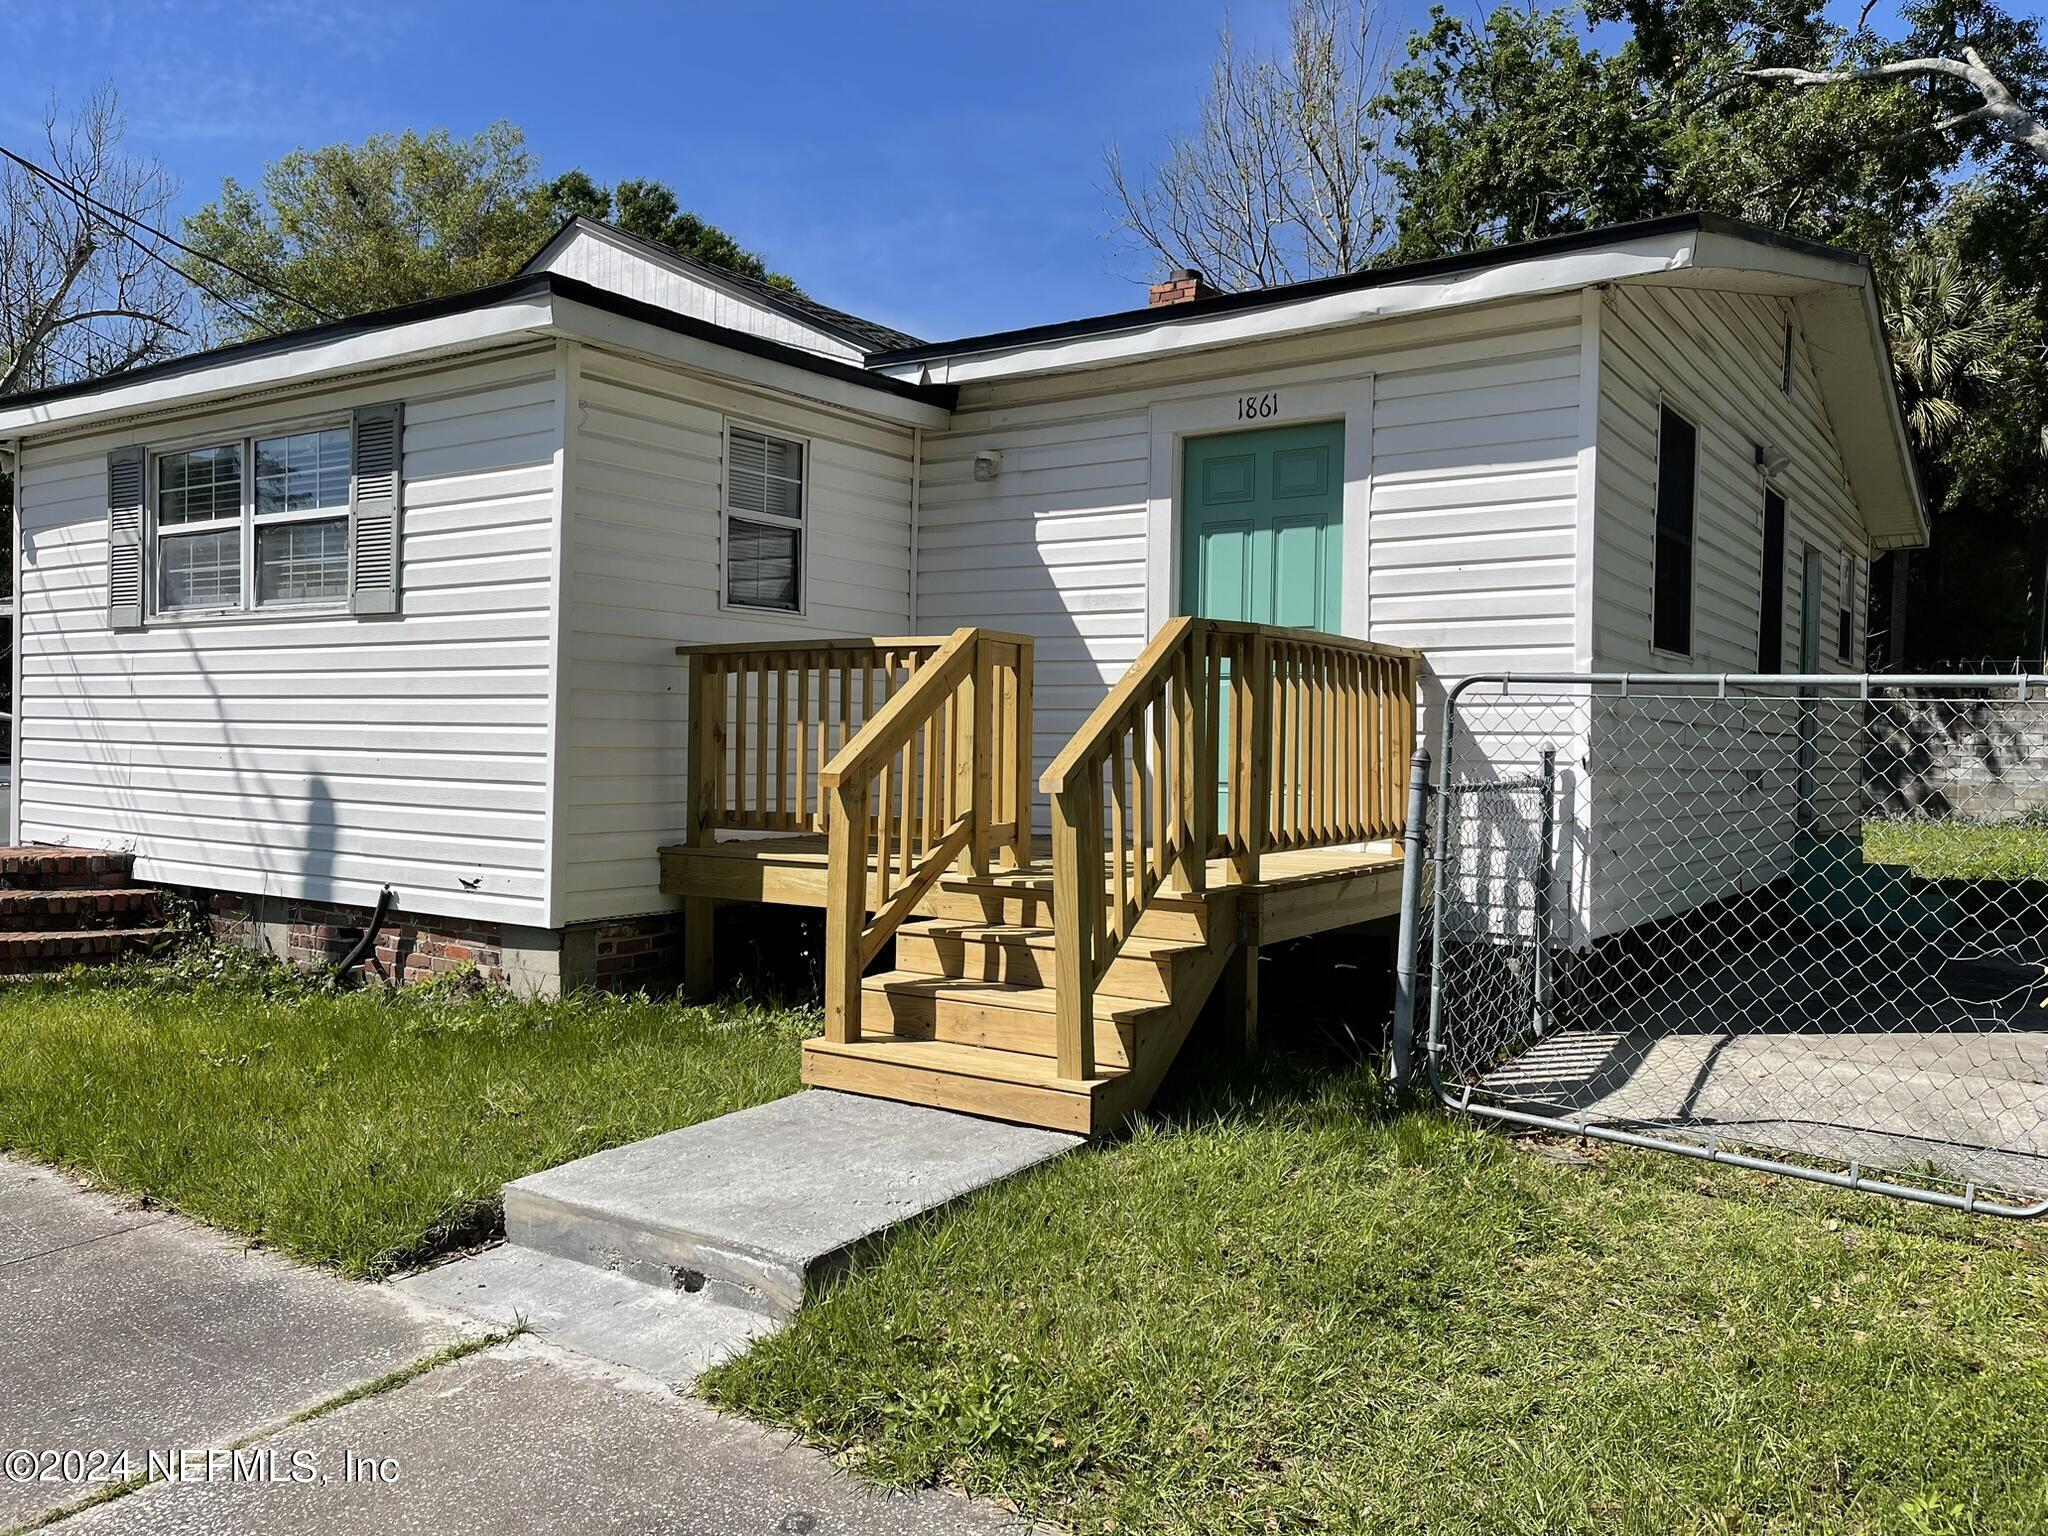 Jacksonville, FL home for sale located at 1861 W 6th St, Jacksonville, FL 32209